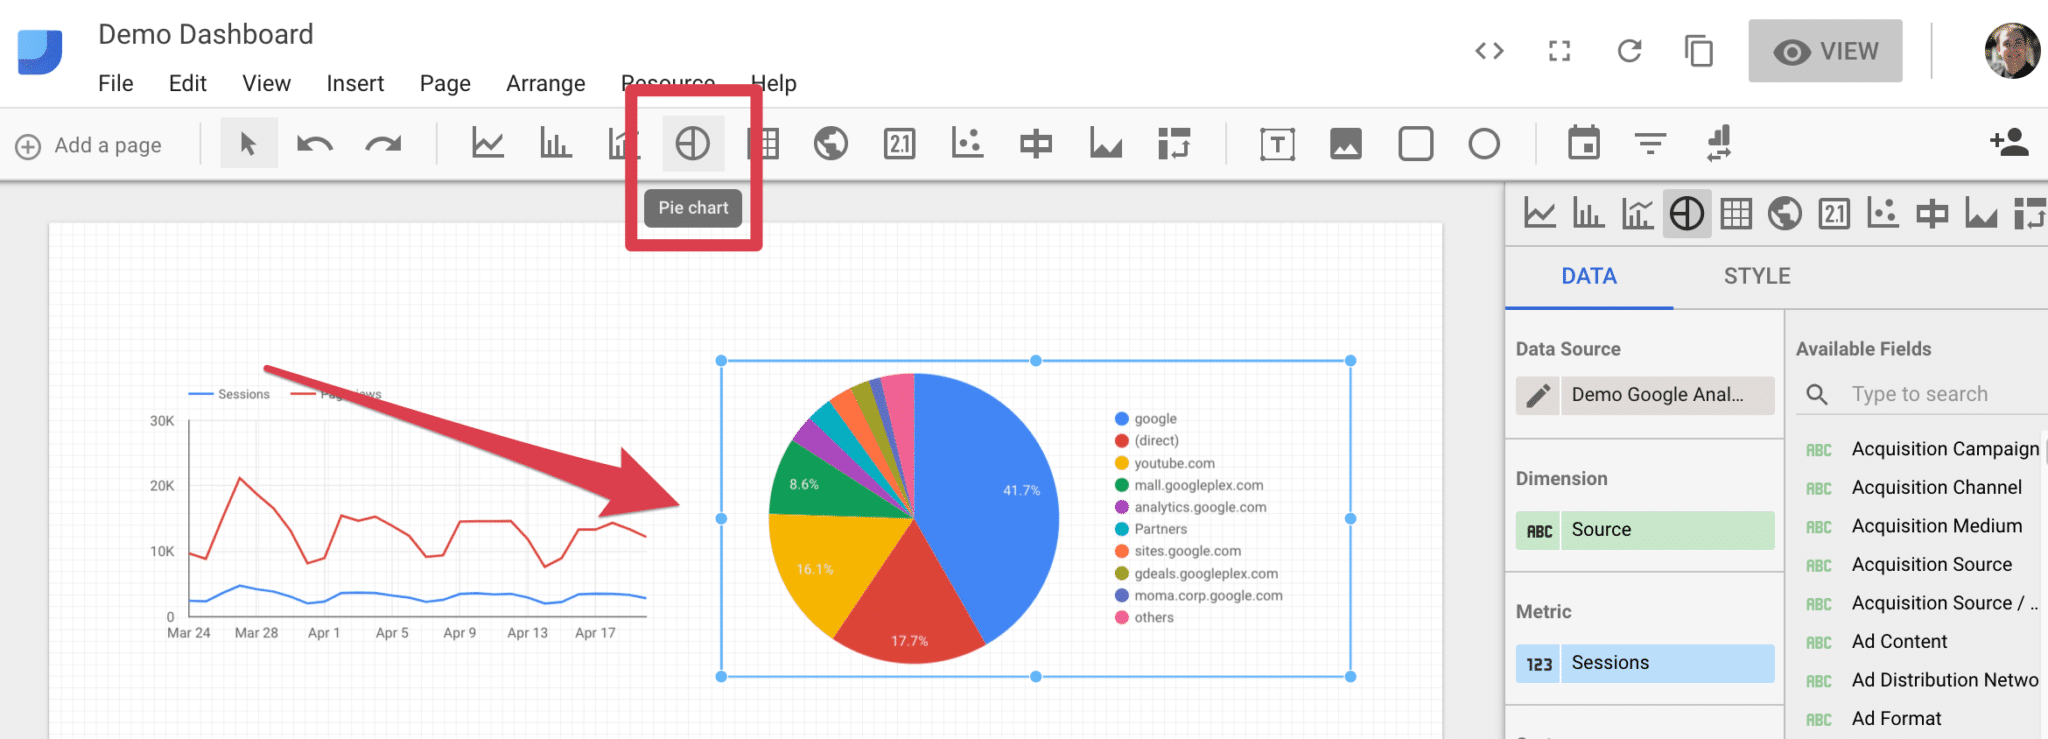 how-to-build-a-google-data-studio-dashboard-step-by-step-tutorial